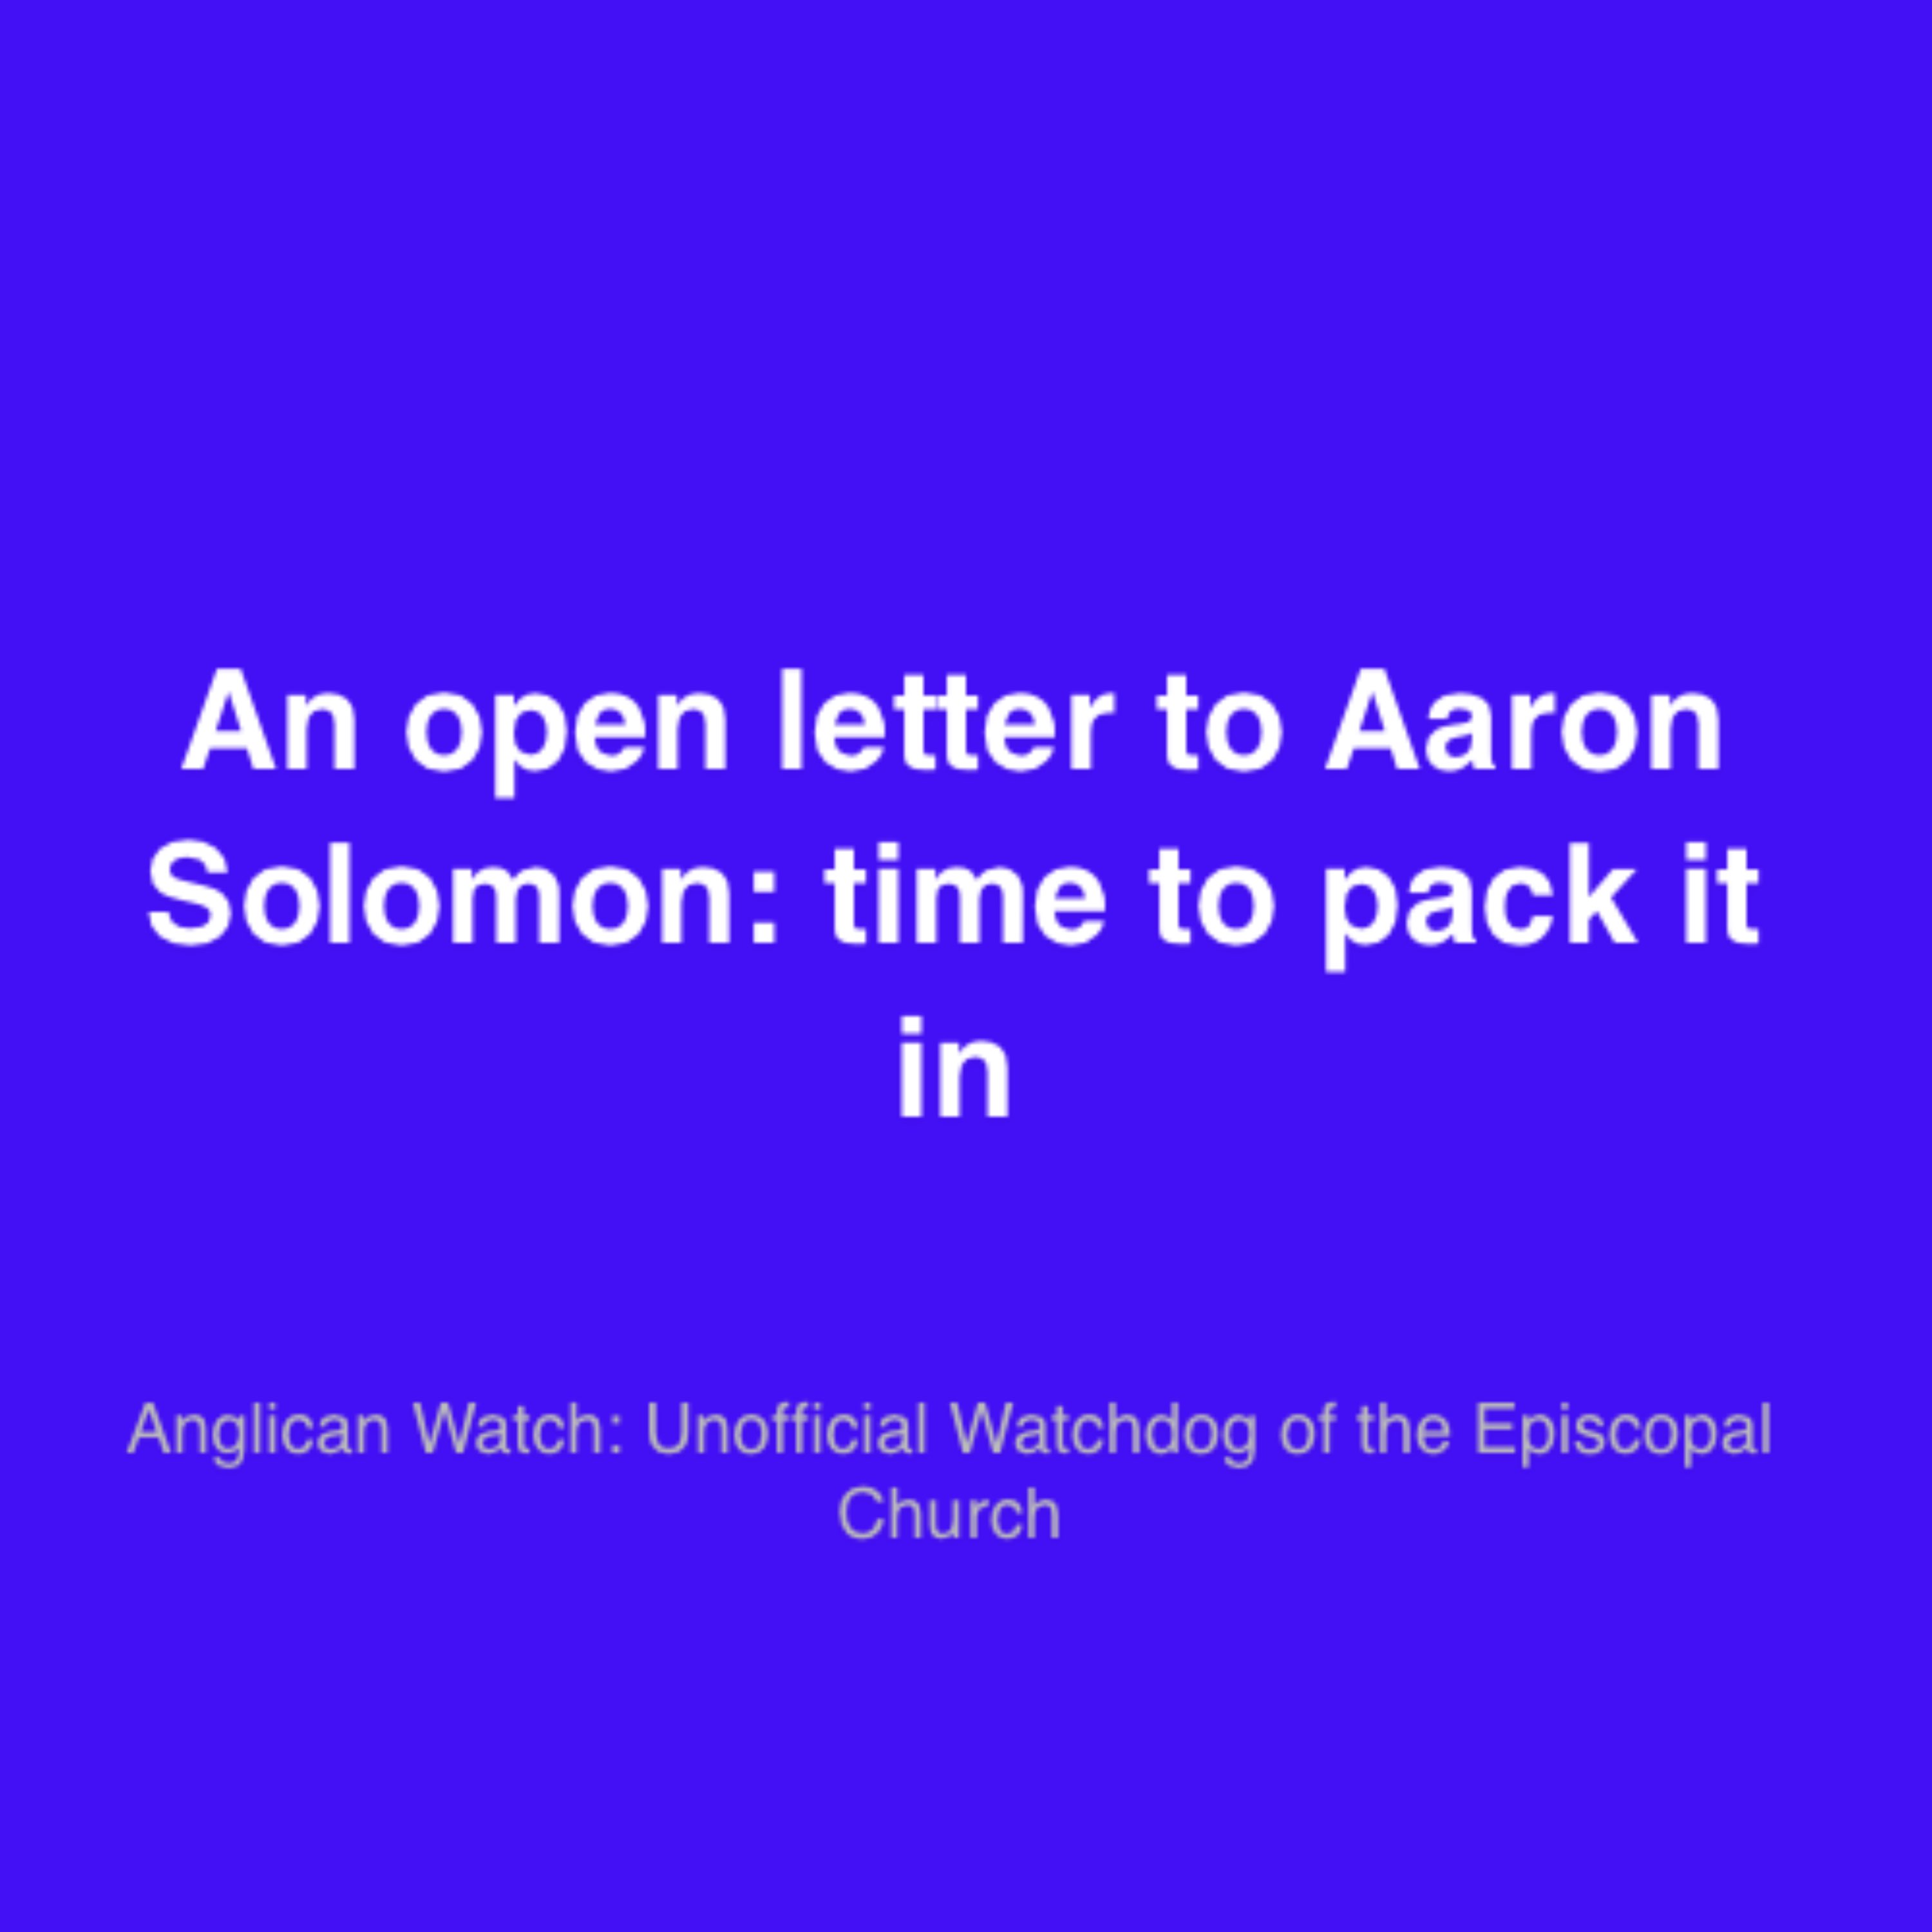 An open letter to Aaron Solomon: time to pack it in